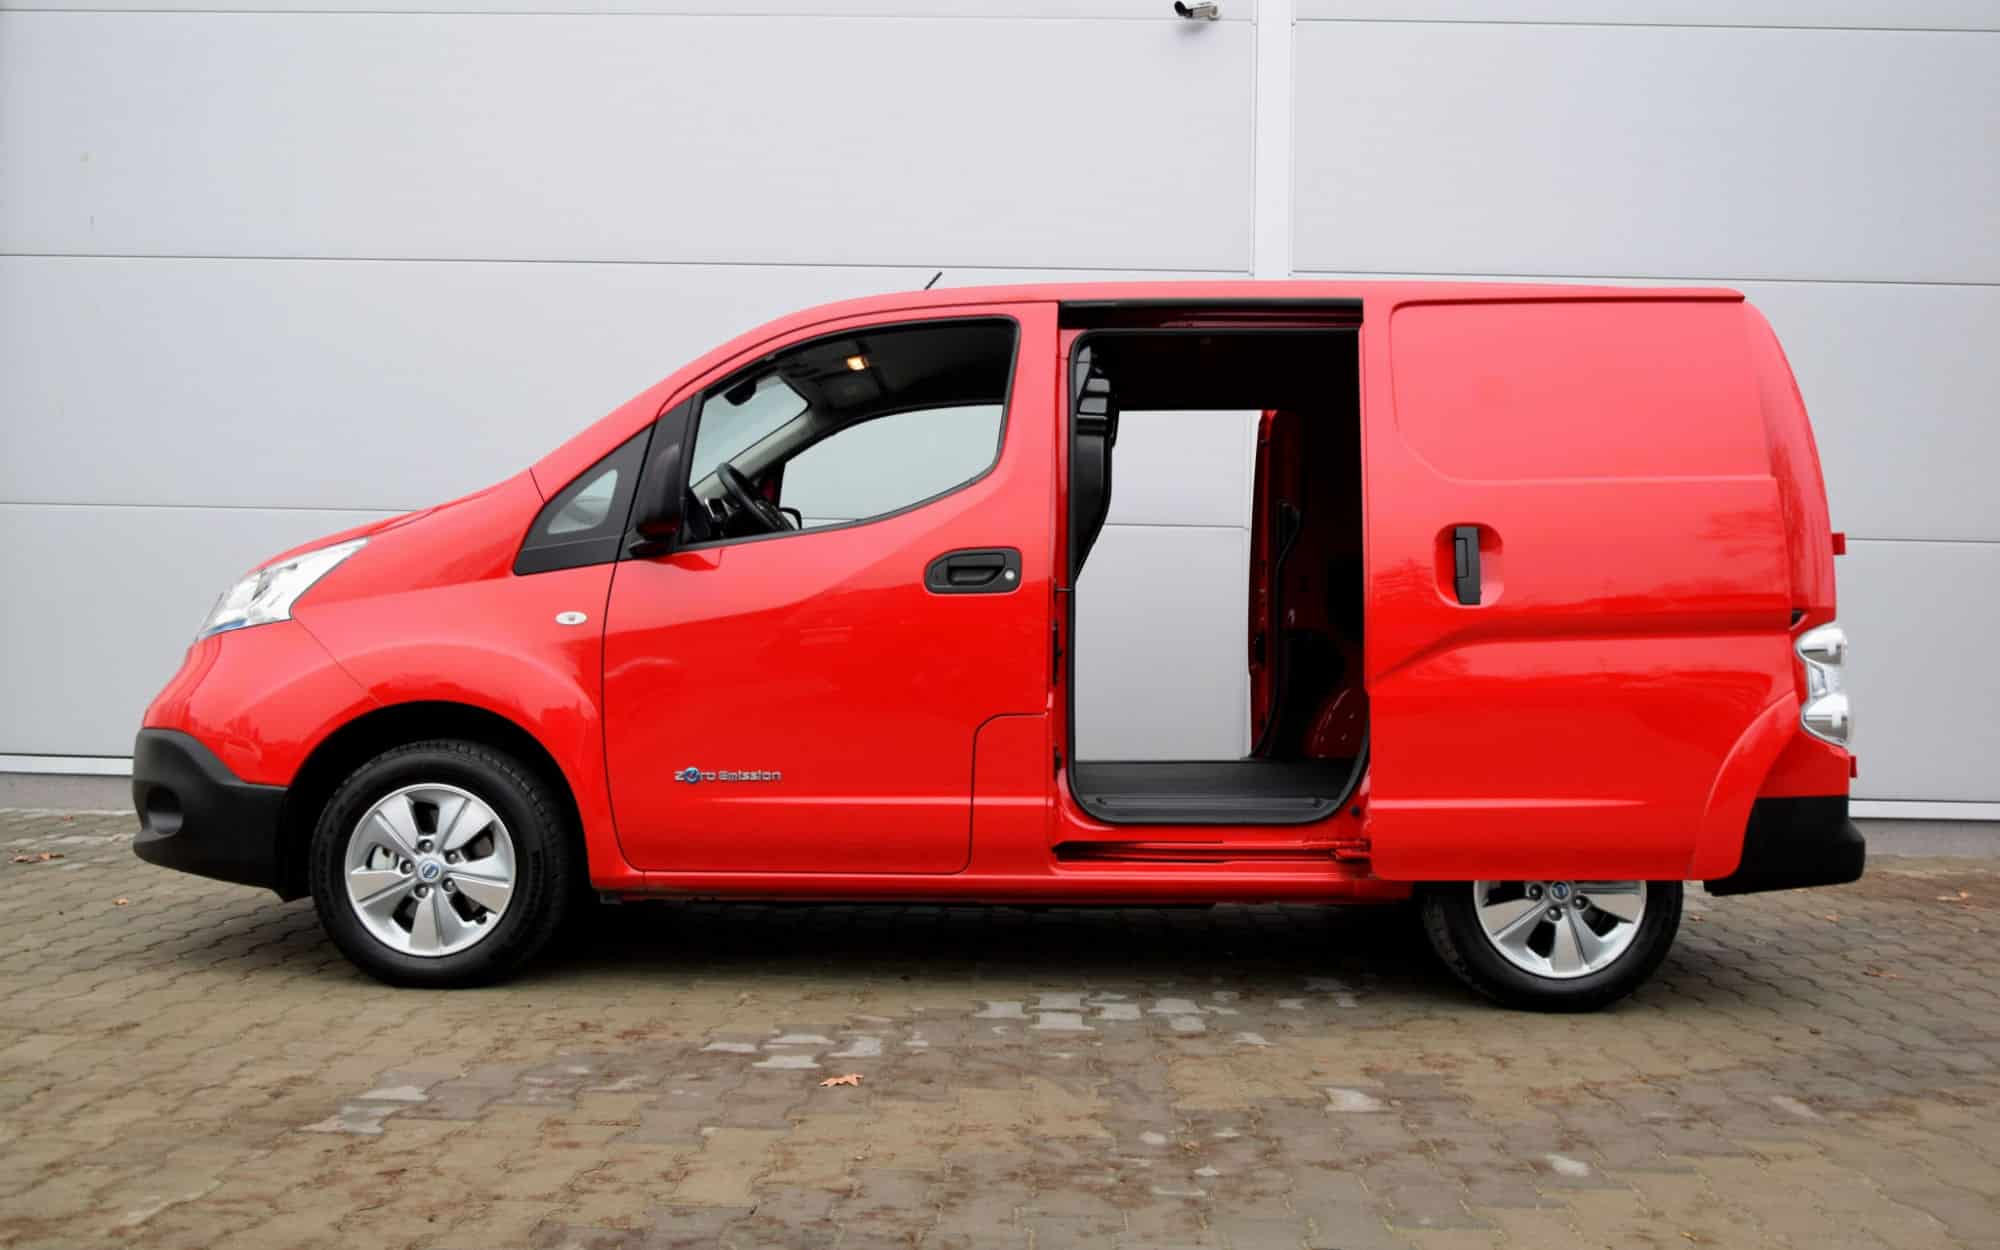 16 Nissan NV200 Camper Conversions That Are Really Innovative | Gnomad Home